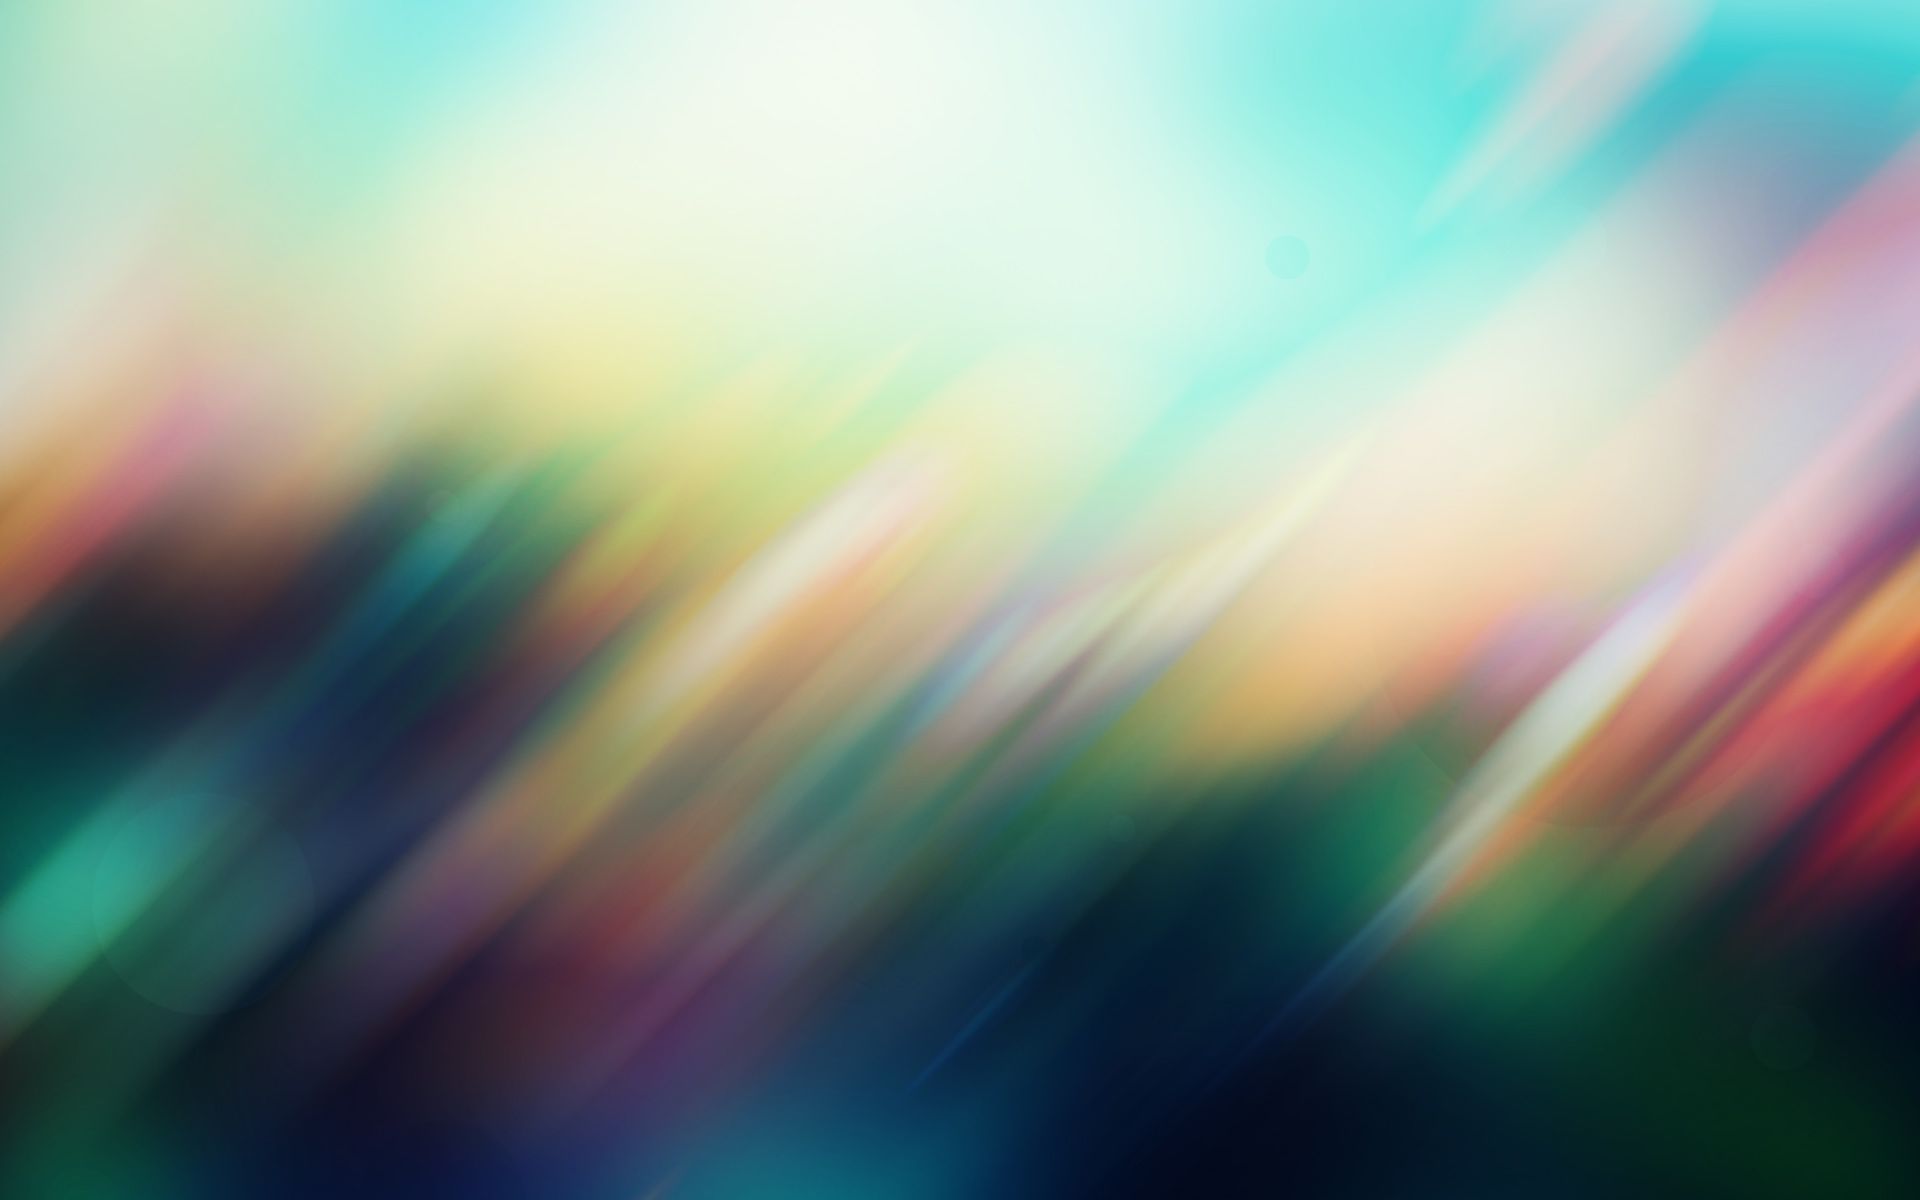 Blur Abstract Colors Hd Wallpapers Wallpaper Cave